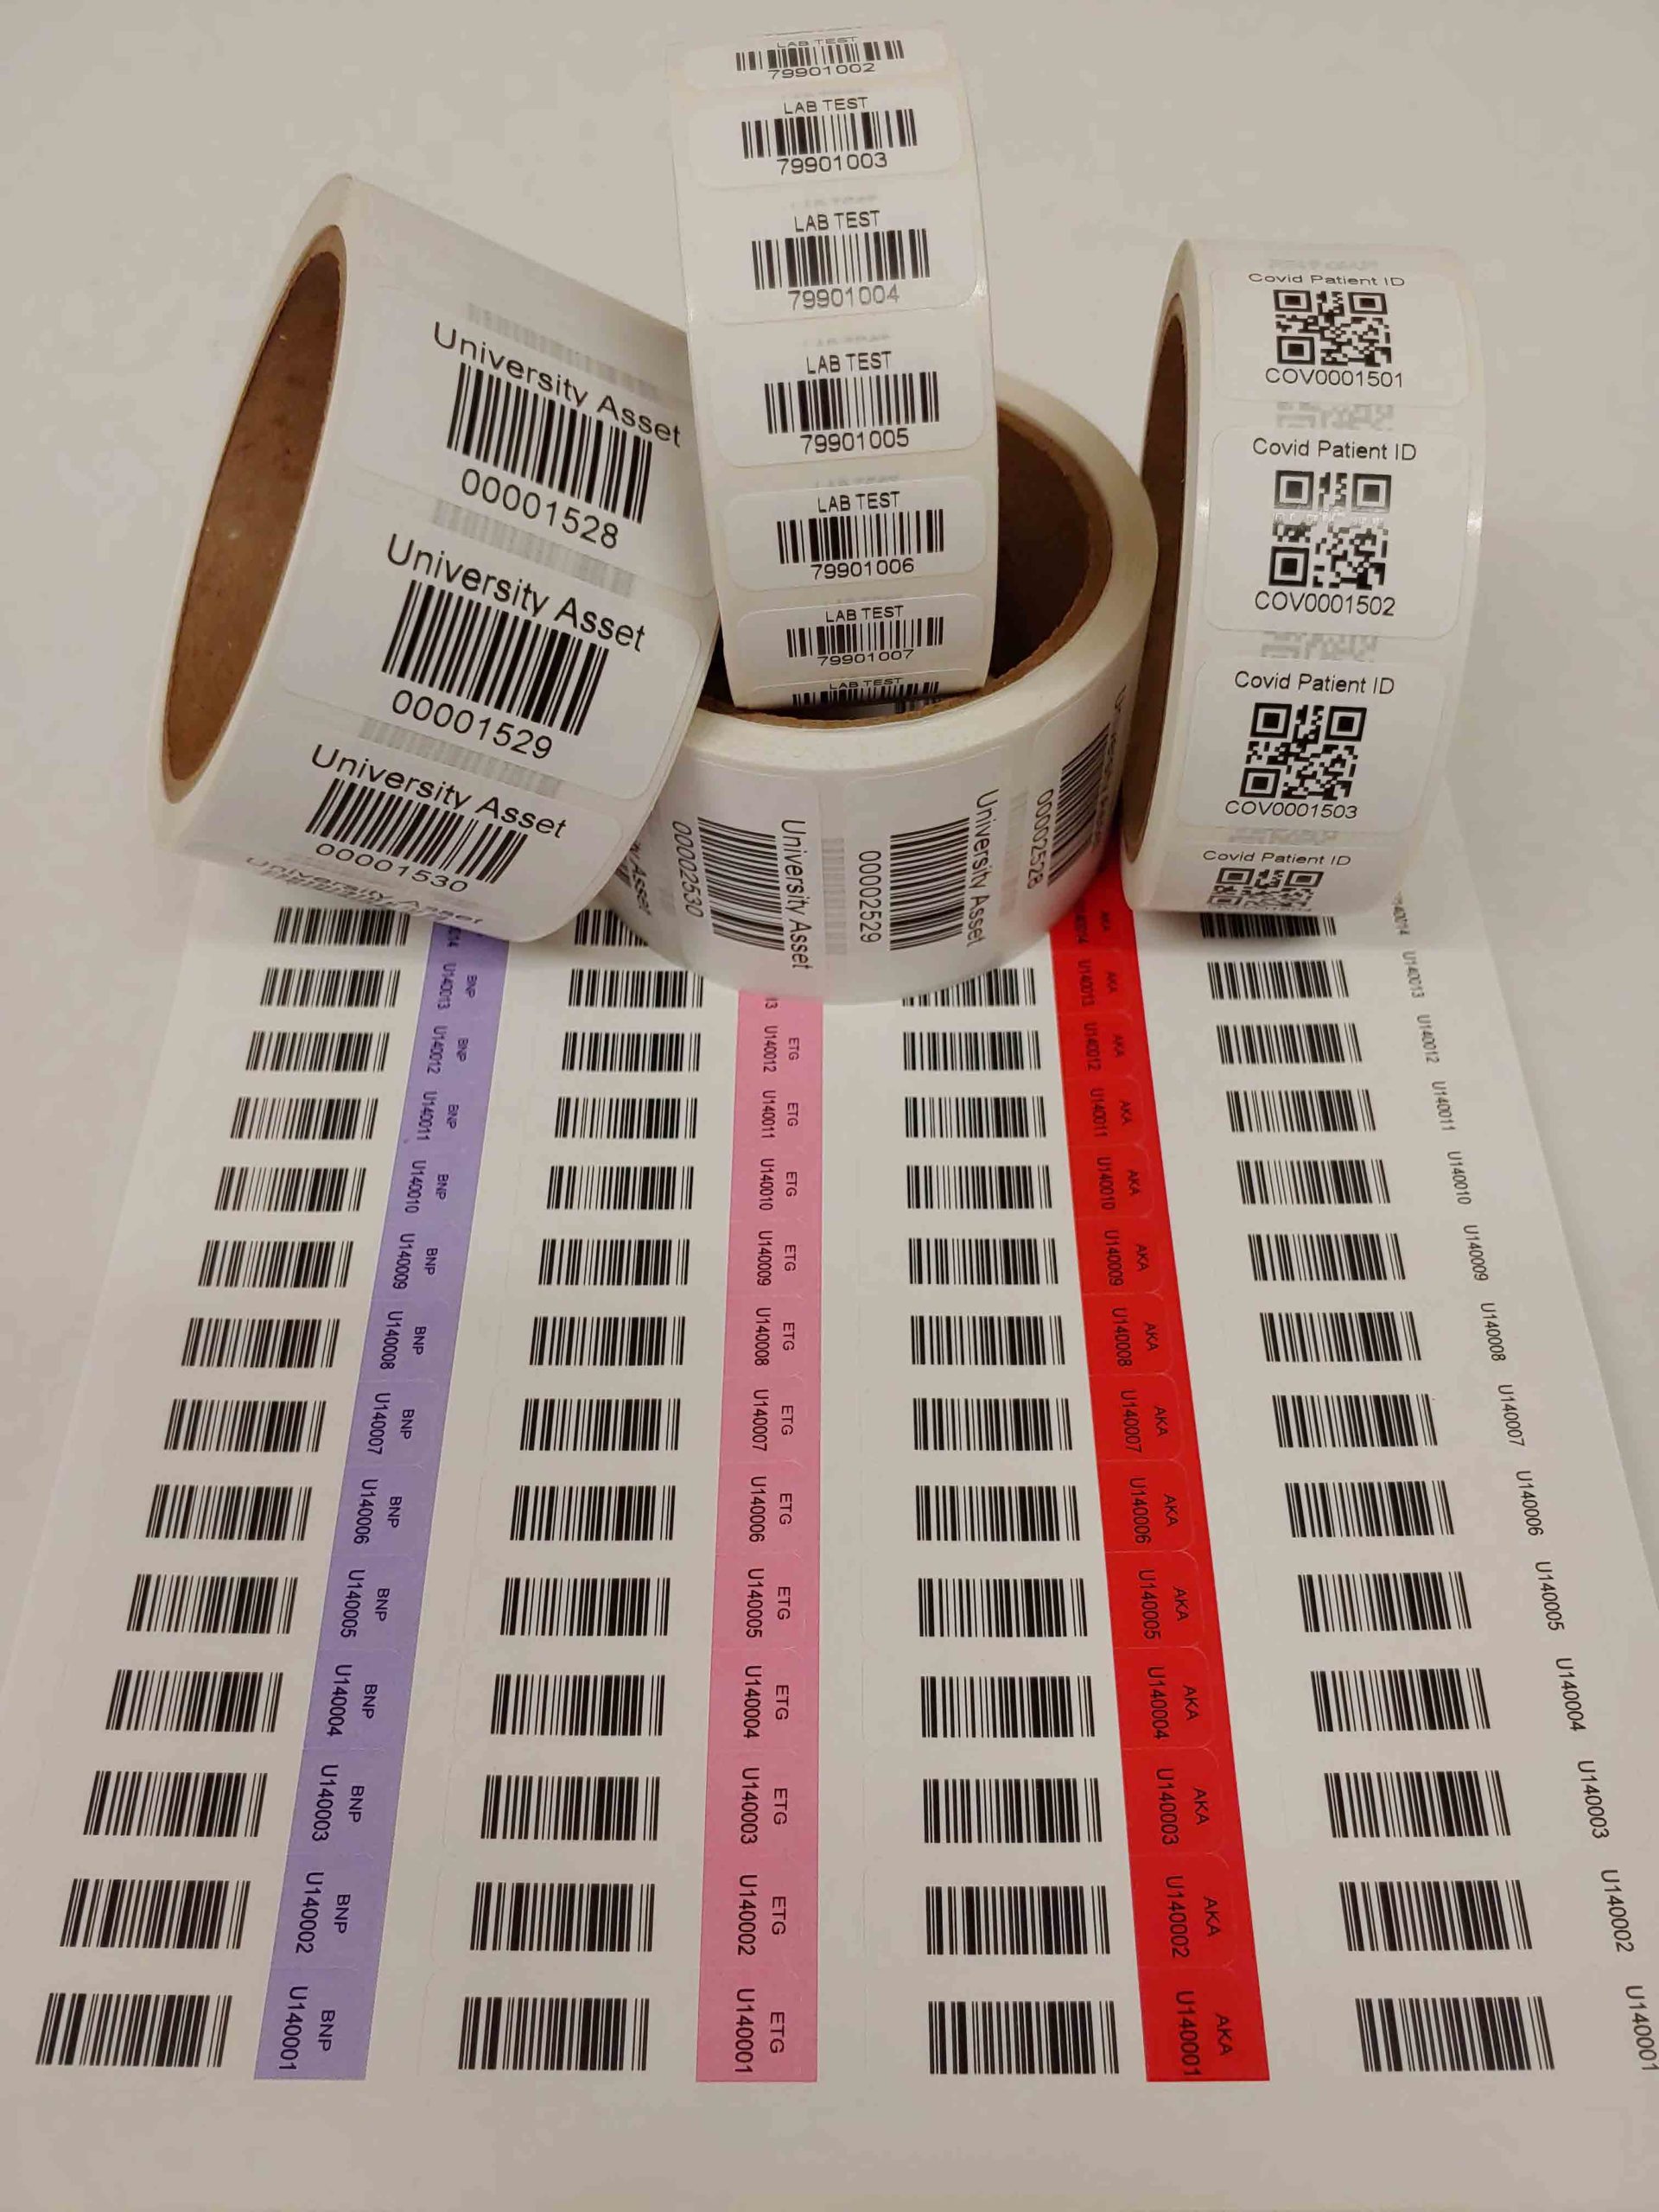 Labs Around the Country Relying on COVID-19 Labels - Bar Code Graphics